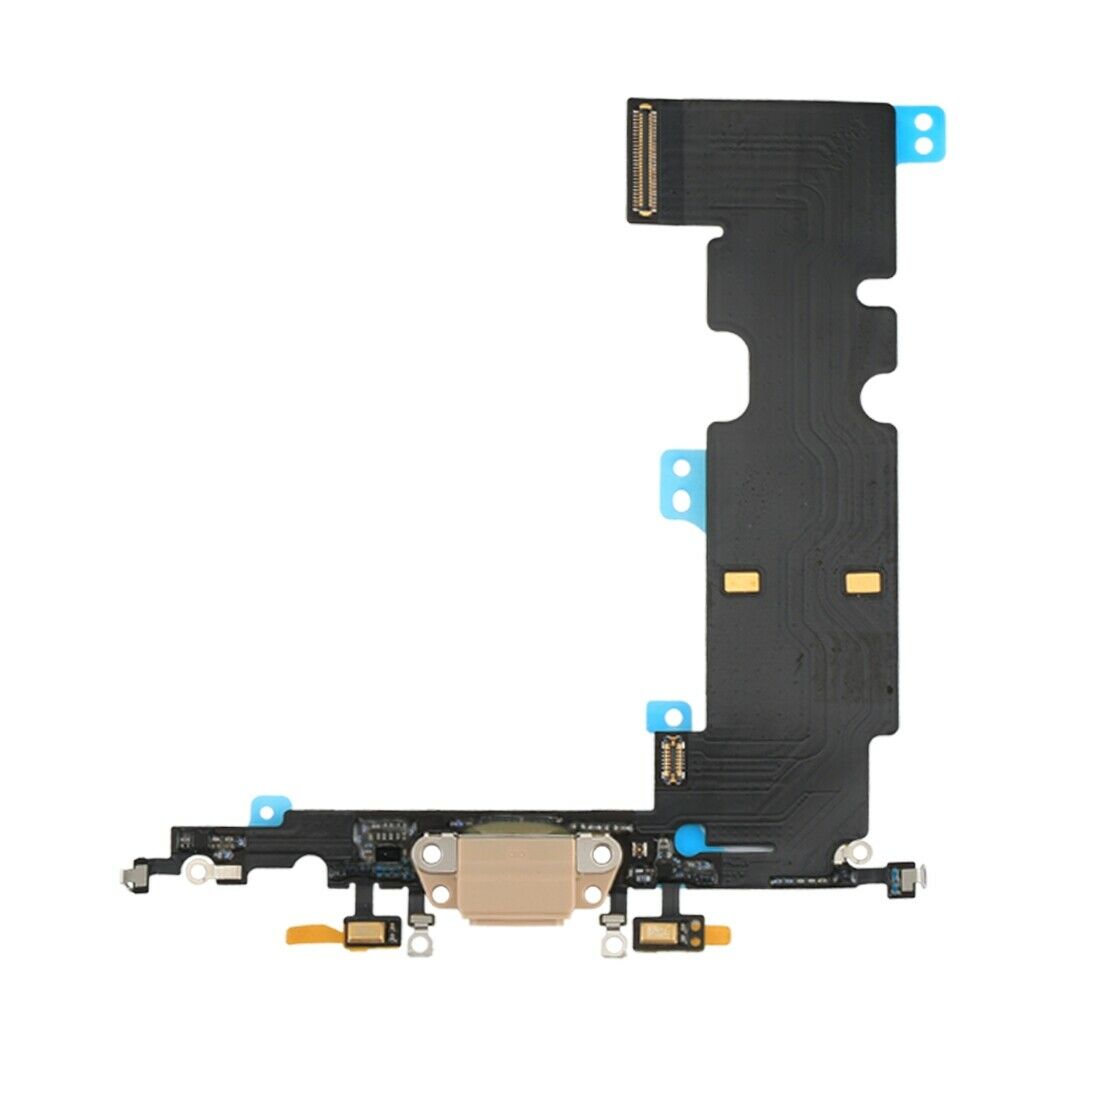 Apple iPhone 8 Plus Charging Port Flex Cable - Gold for [product_price] - First Help Tech